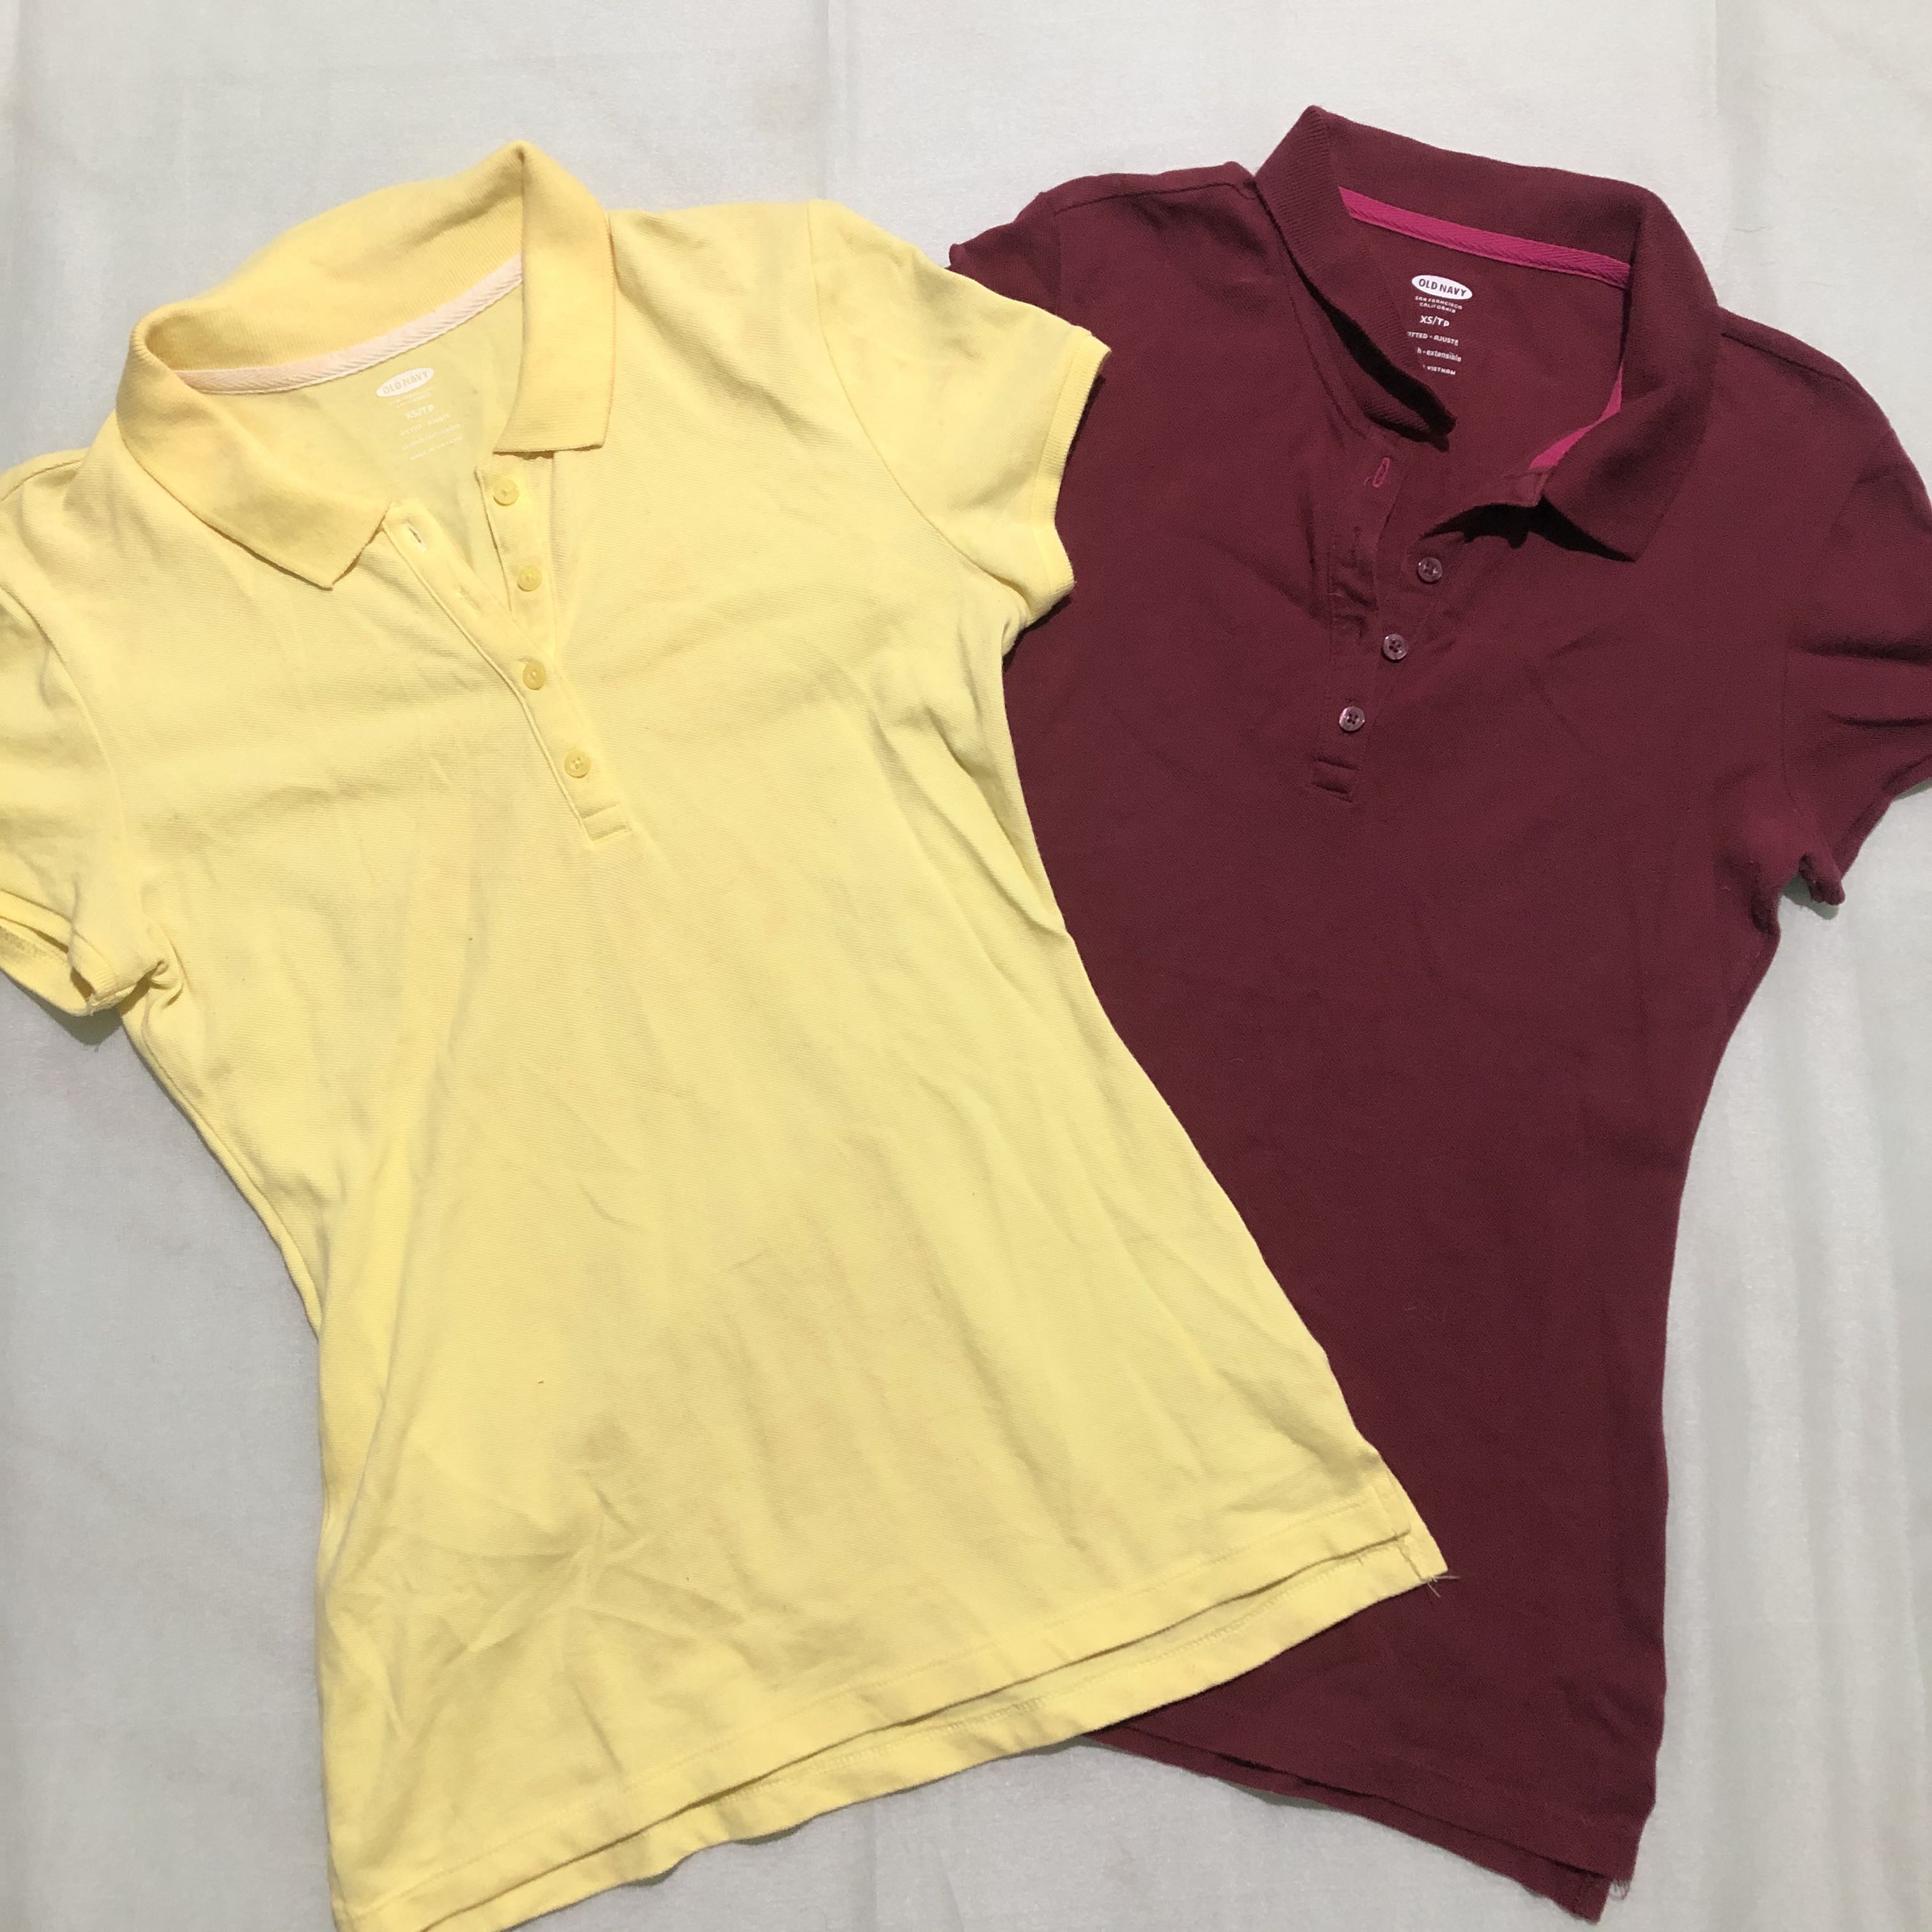 old navy ladies polo shirts